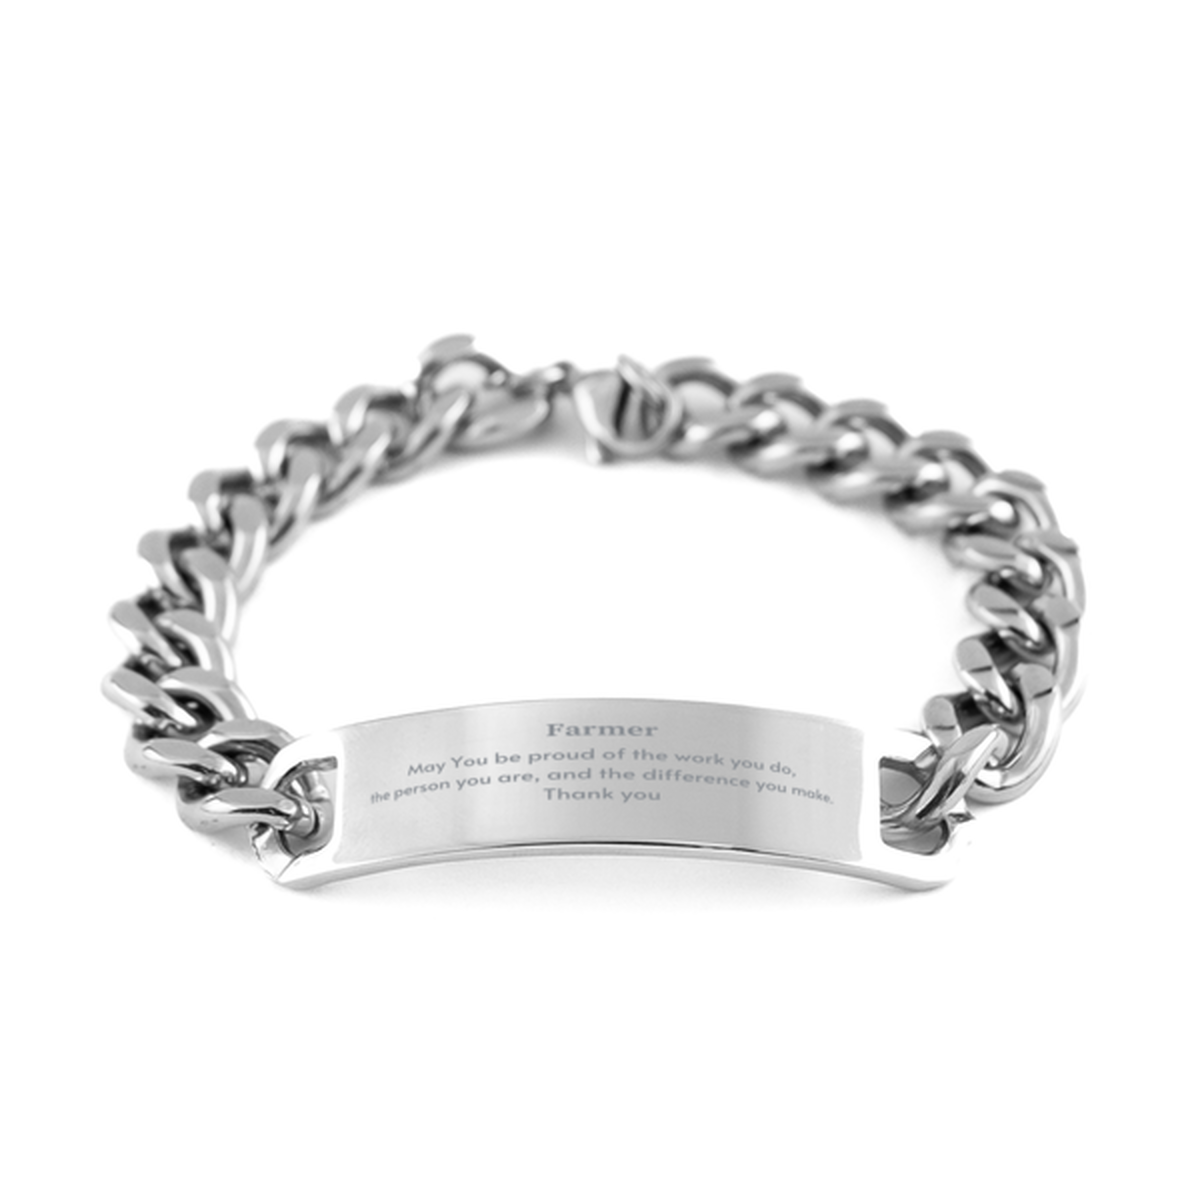 Heartwarming Cuban Chain Stainless Steel Bracelet Retirement Coworkers Gifts for Farmer, Farmer May You be proud of the work you do, the person you are Gifts for Boss Men Women Friends